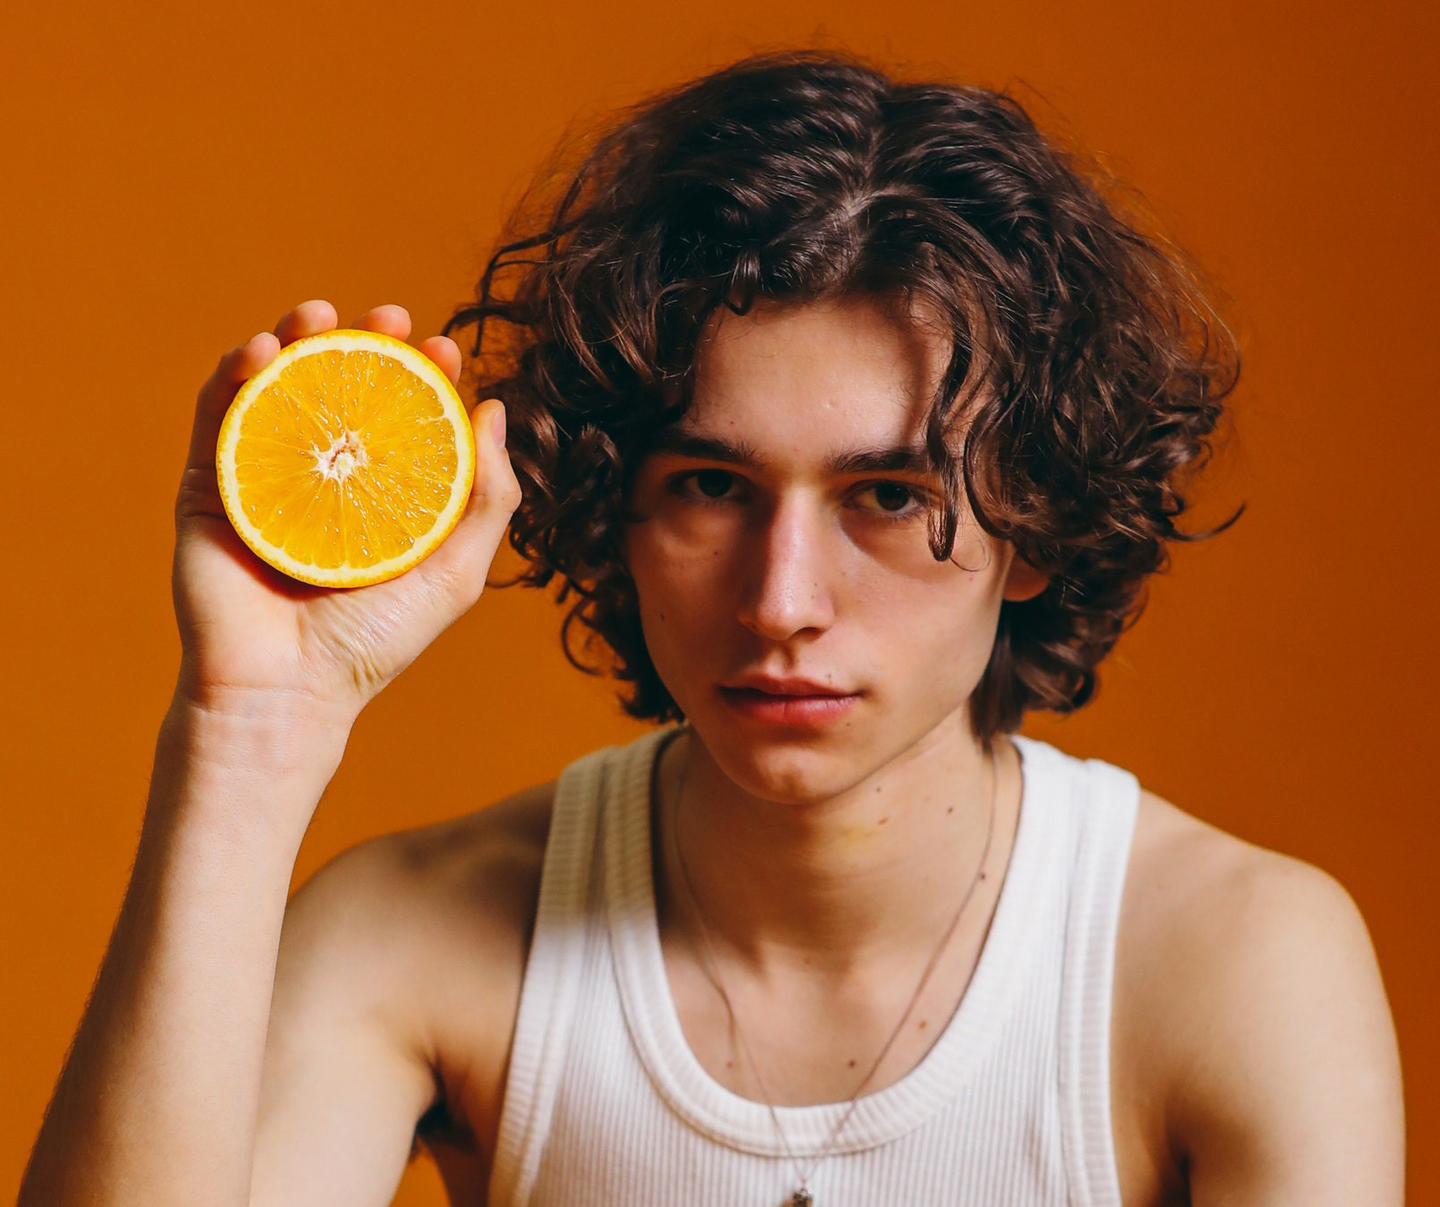 Curly-haired individual with citrus, representing vitamin-rich hair care.